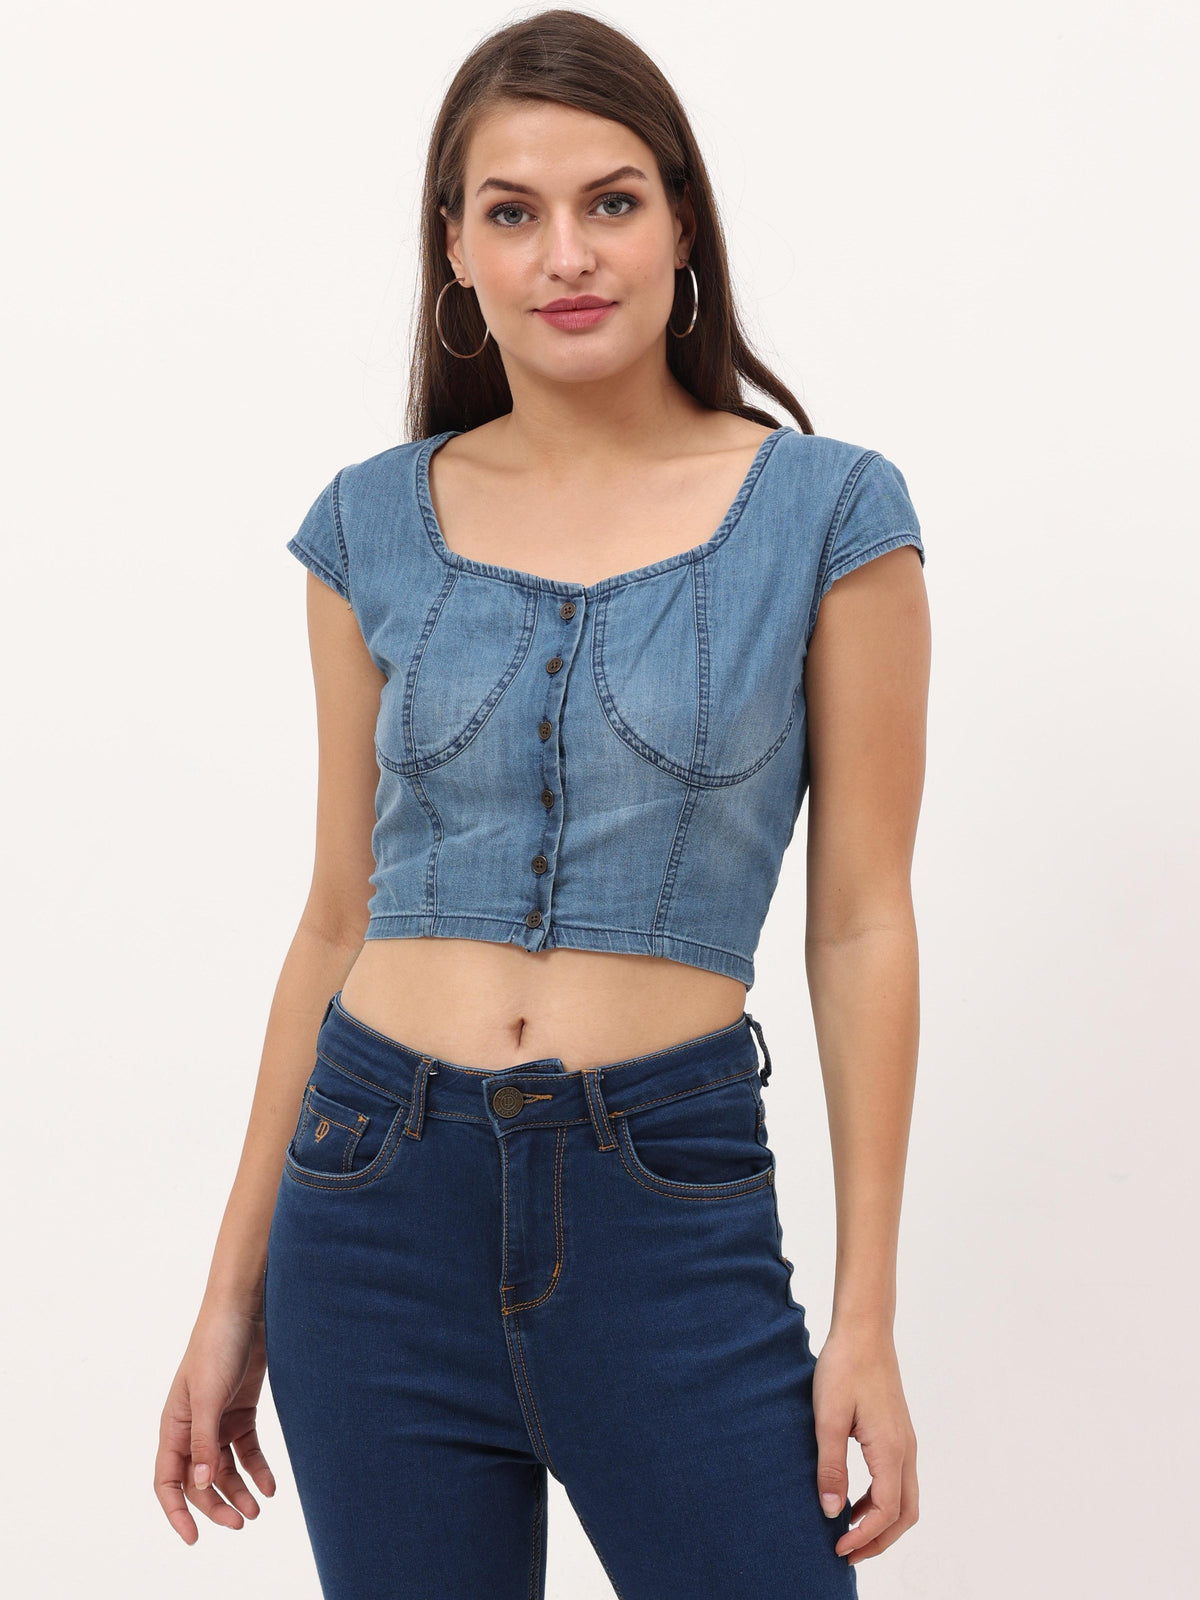 Urban Revivo Denim Bustiers With Strap | Great Fall Outfit I Want to Be  Wearing: Issa Rae's Denim Bra and Button-Down | POPSUGAR Fashion UK Photo 15